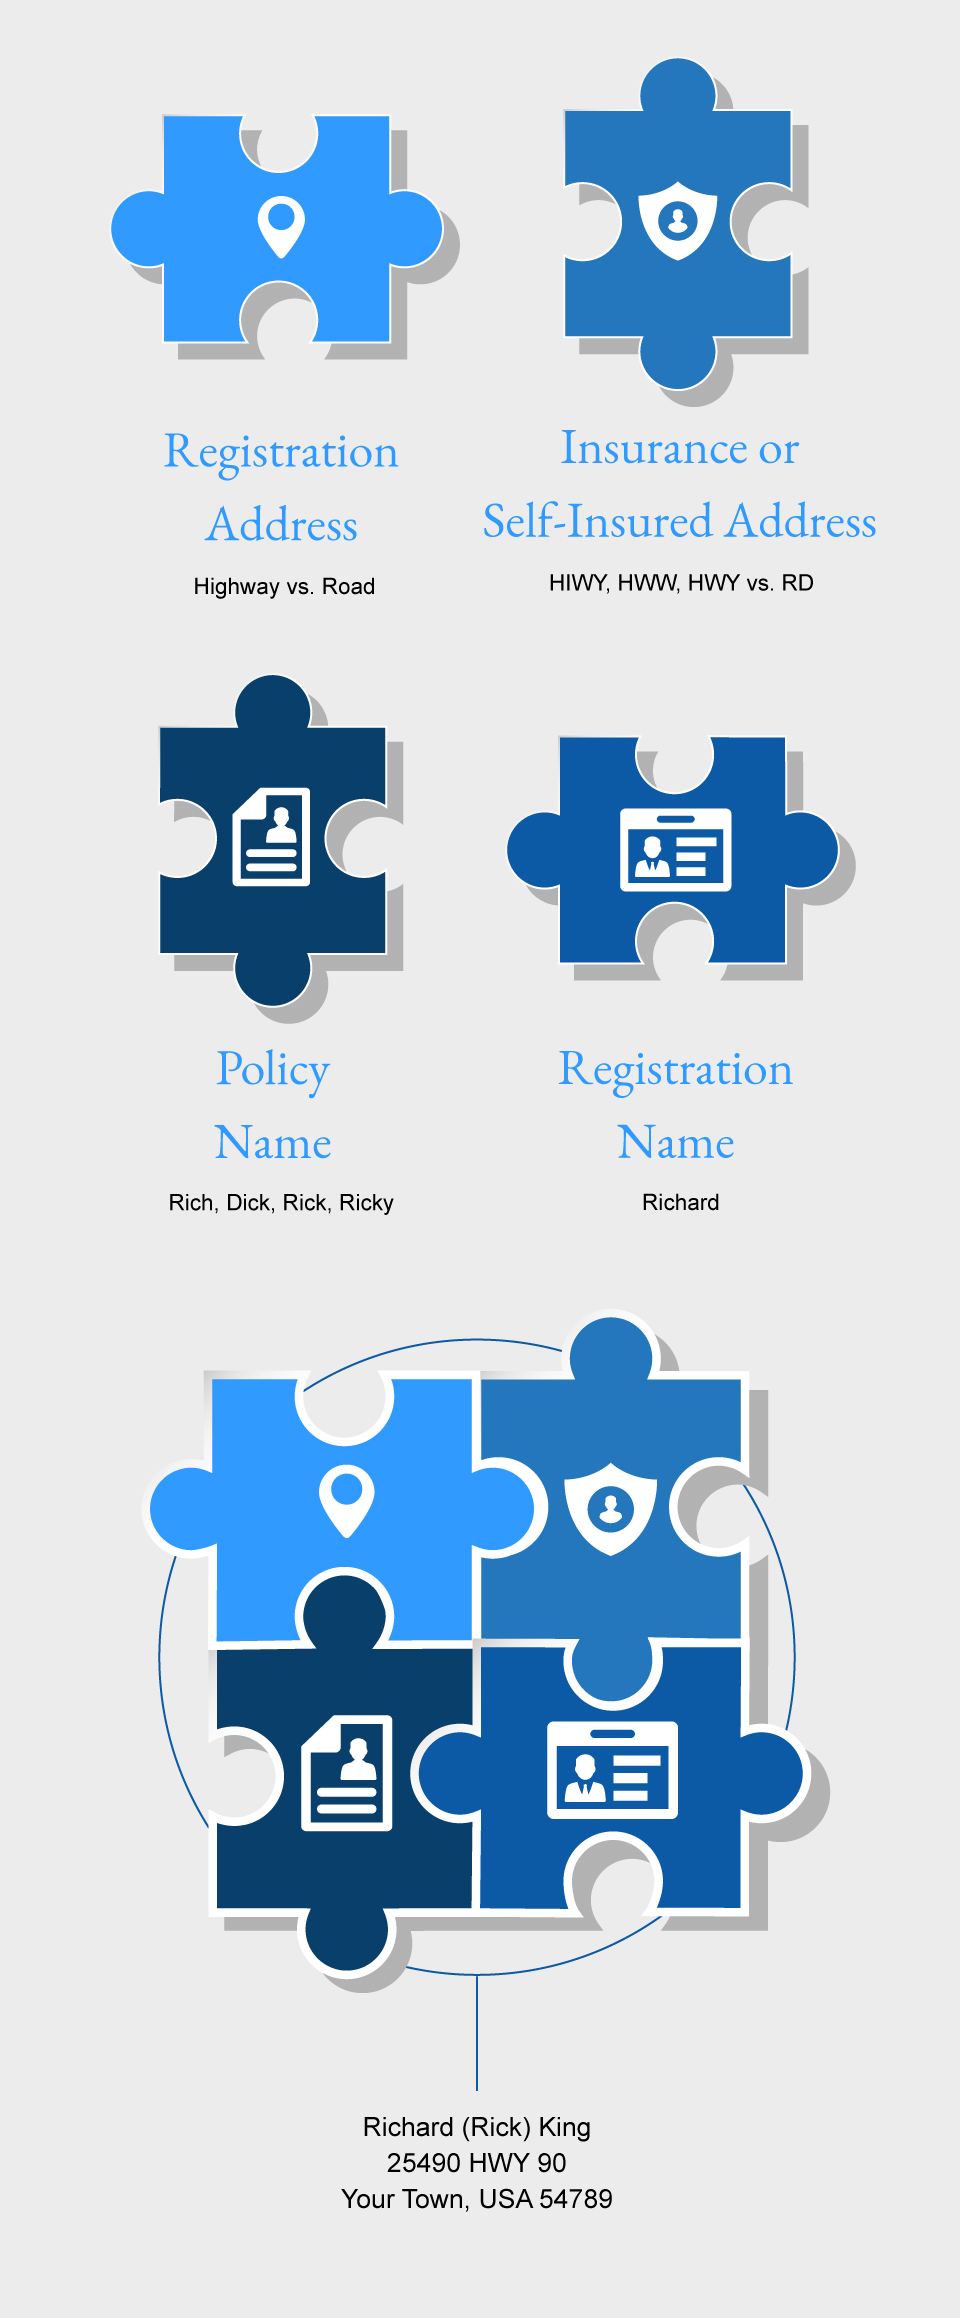 Infographic of Puzzle pieces of registration address, insurance address, policy name and registration named matched with puzzle pieces fitting together.